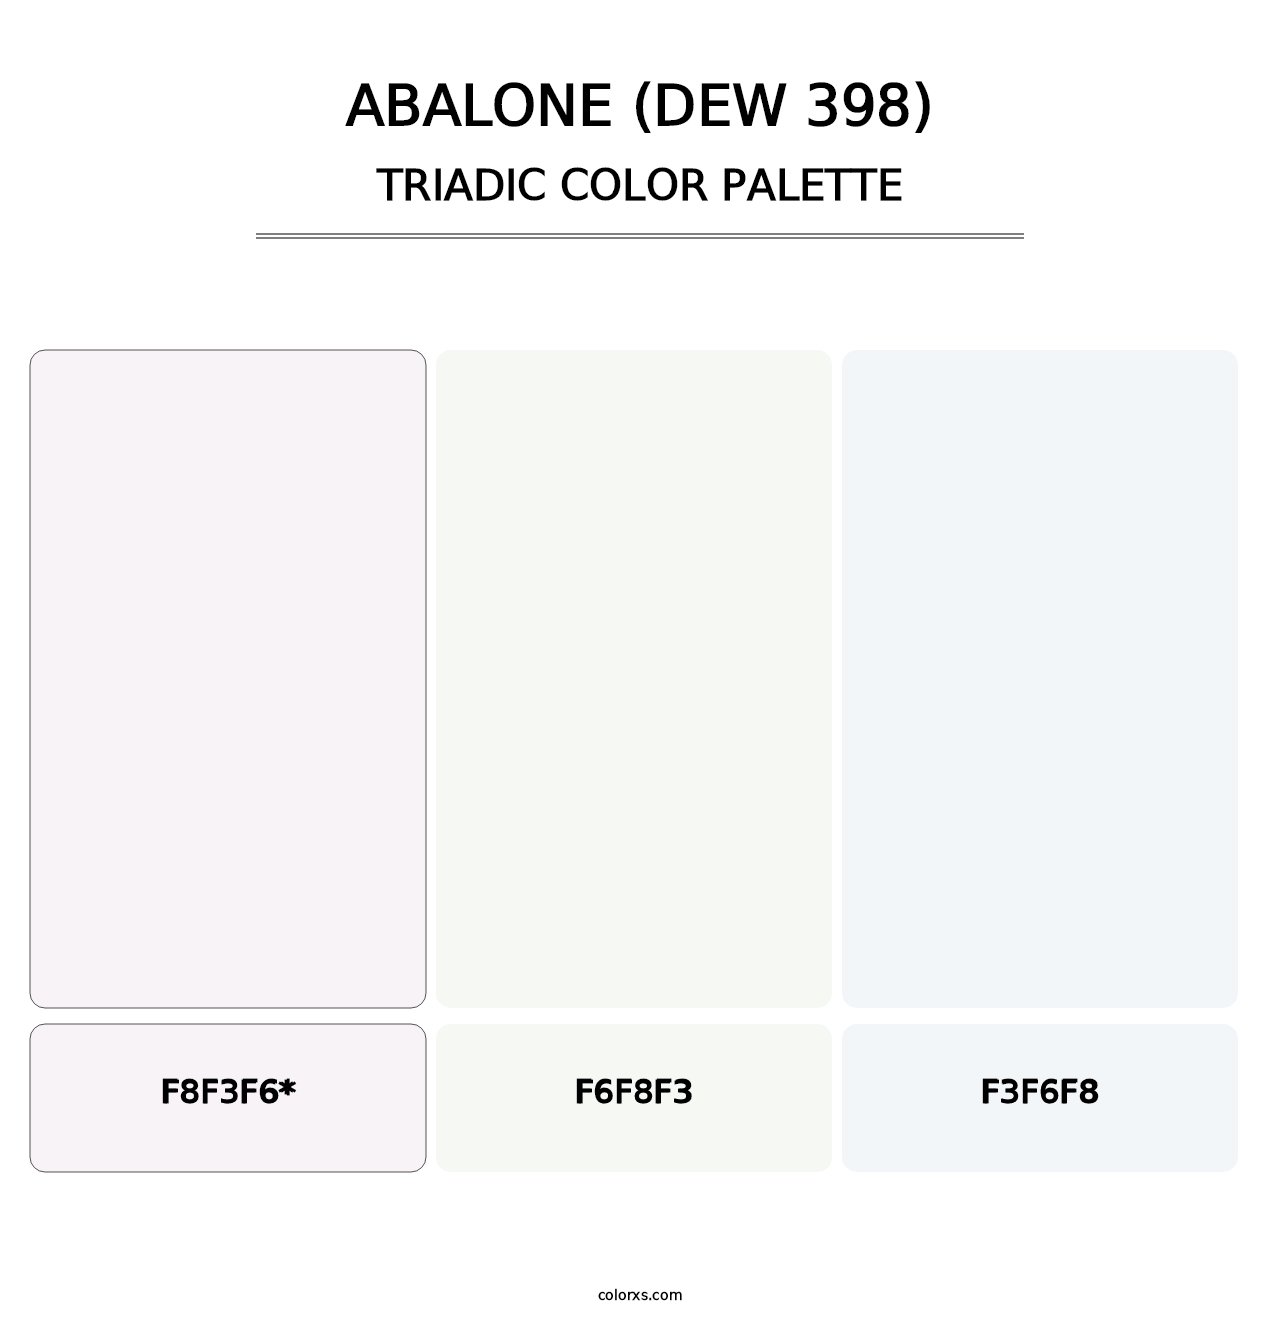 Abalone (DEW 398) - Triadic Color Palette